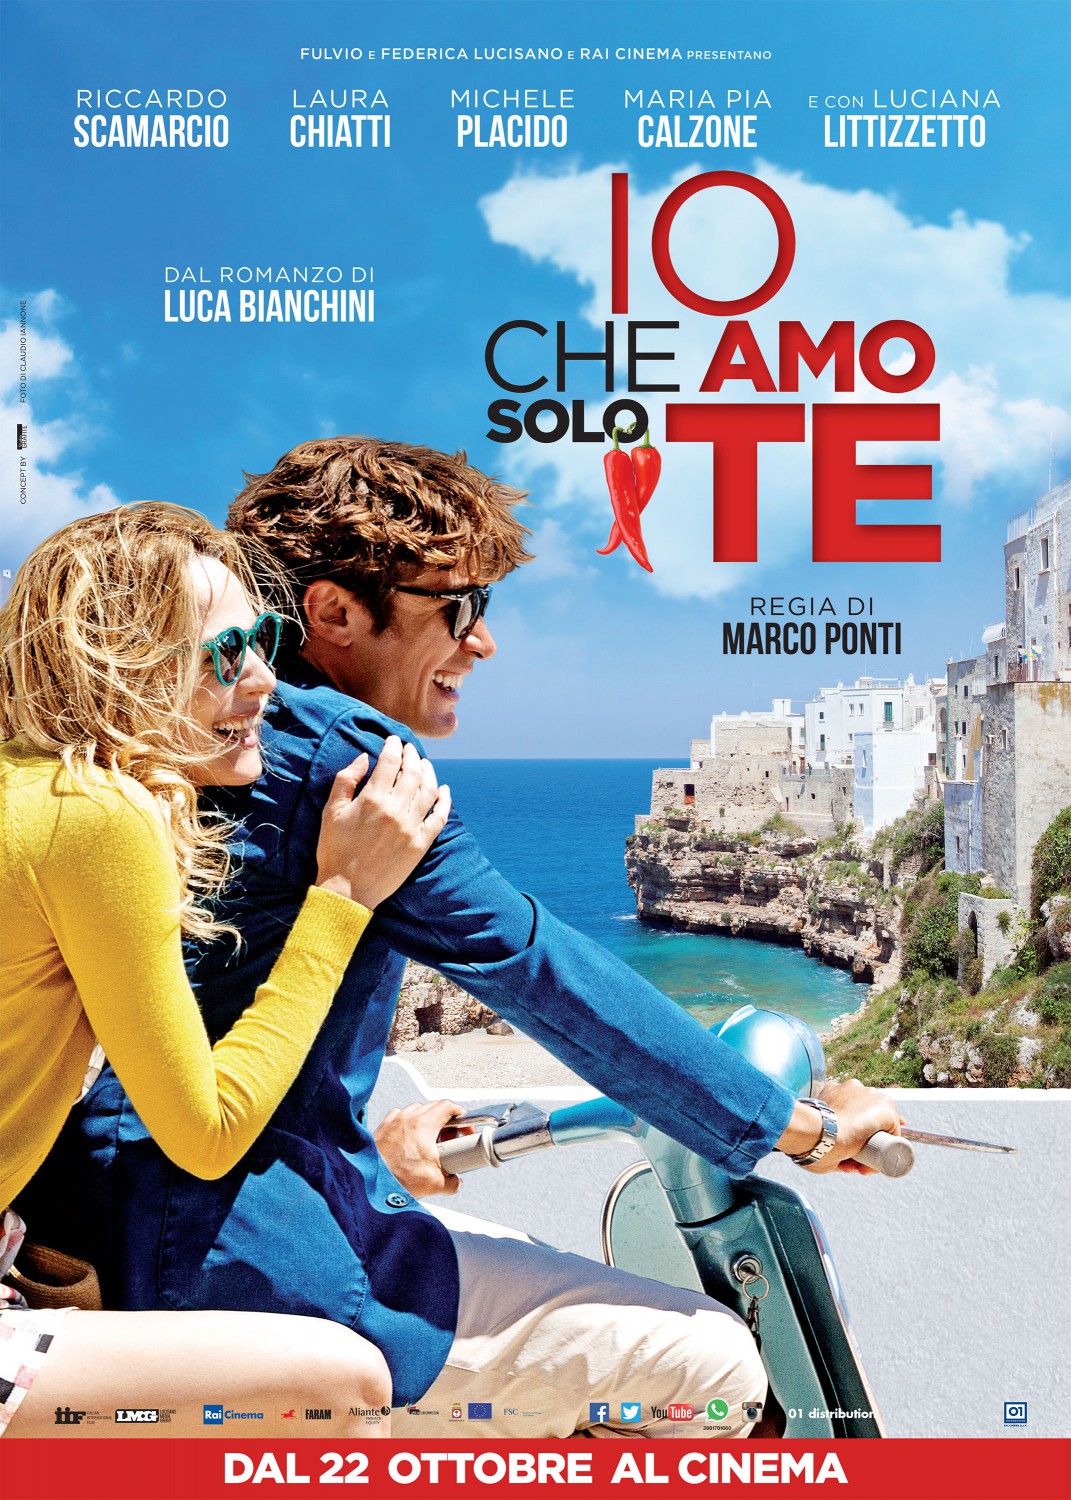 Extra Large Movie Poster Image for Io che amo solo te 